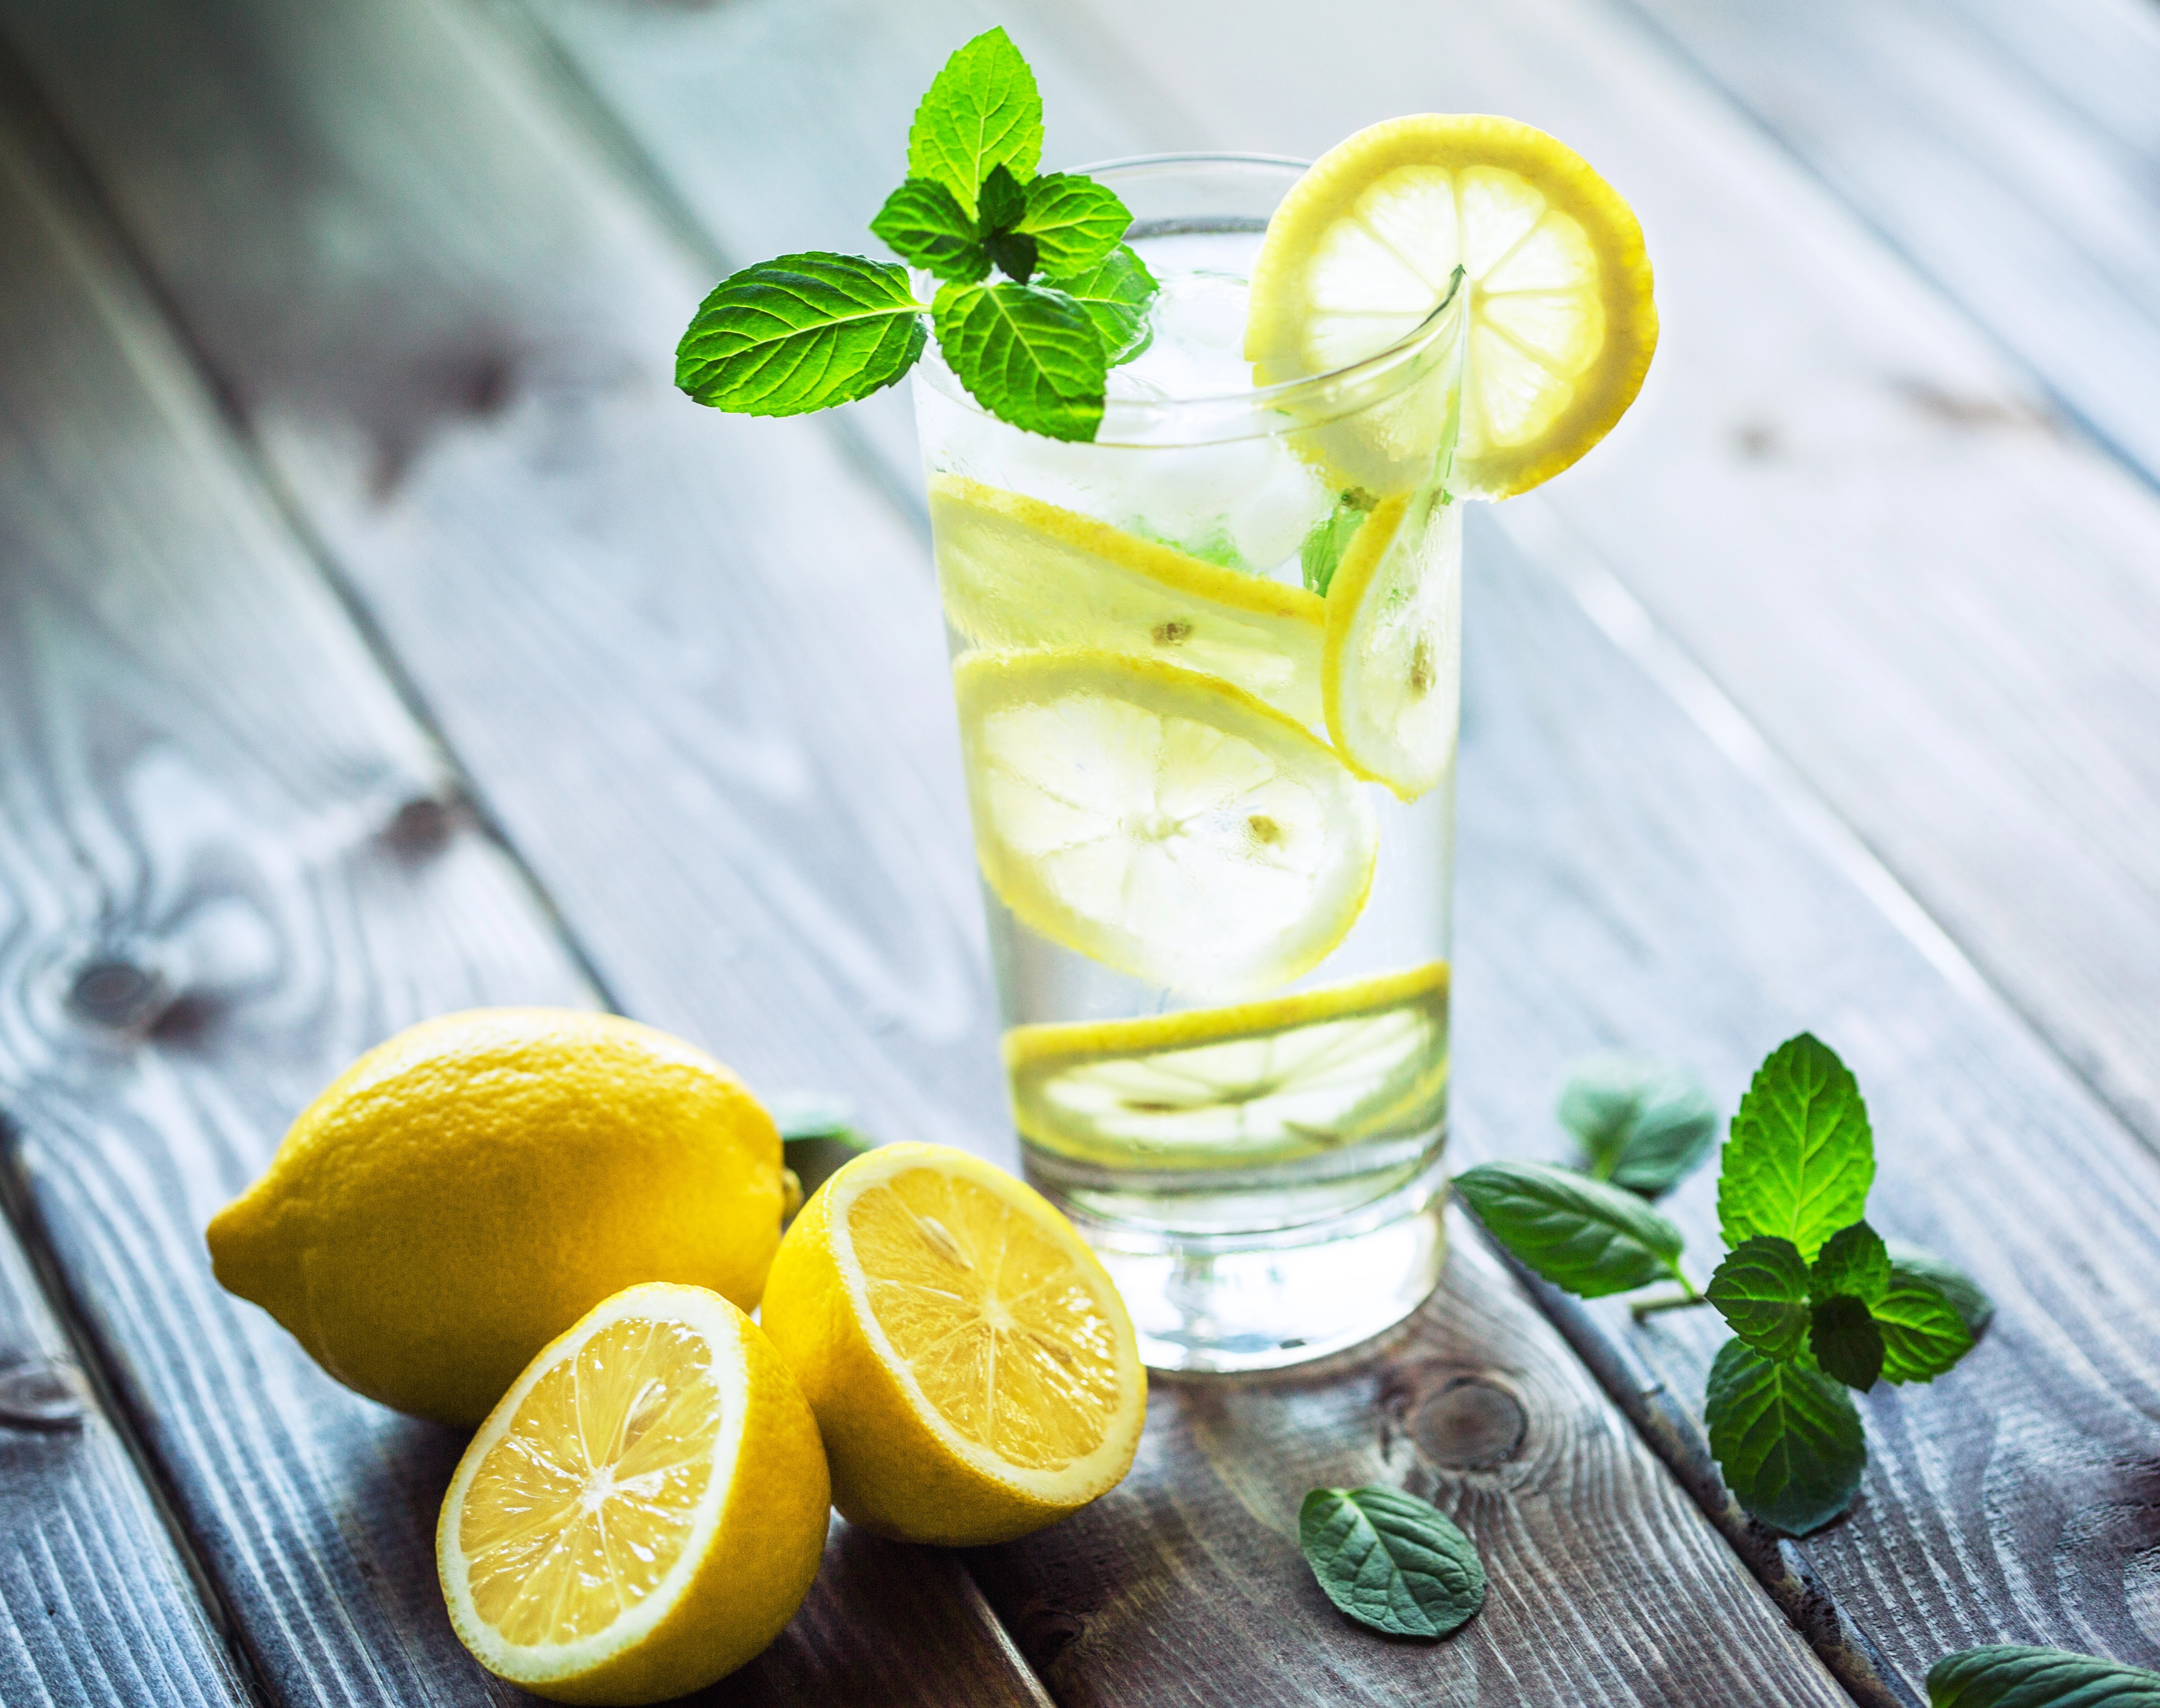 Do You Know Drinking Lemon Water Every Day Can Solve These 13 Health Problems